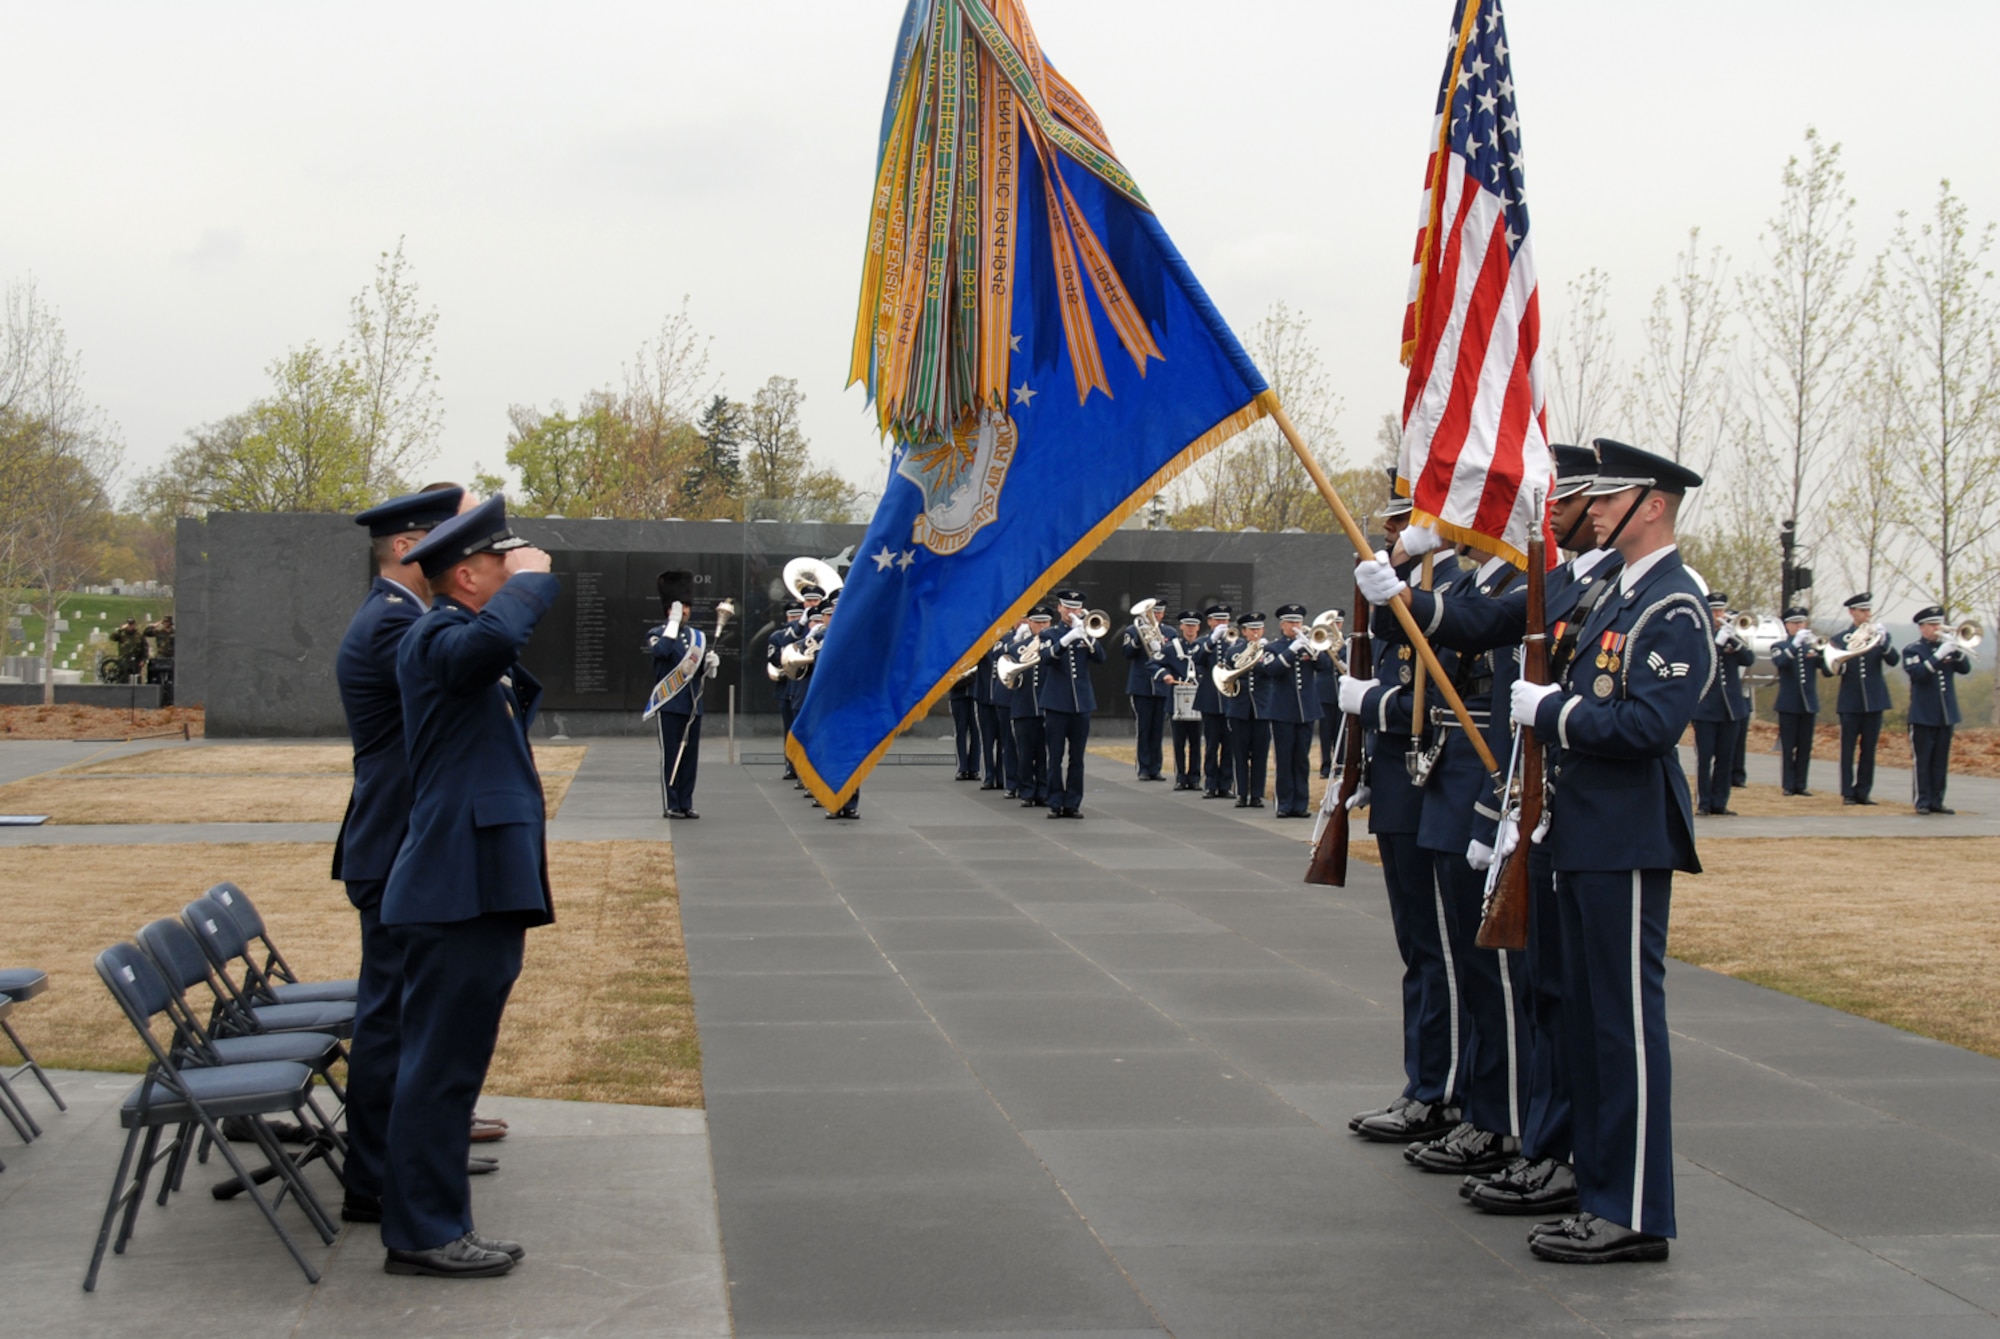 ARLINGTON, Va. -- The Air Force Honor Guard presents the colors during the Air Force Review ceremony April 14 at the Air Force Memorial.  Maj. Gen. Robert Smolen, Air Force District of Washington commander, was the host of the event, as well as the reviewing official.